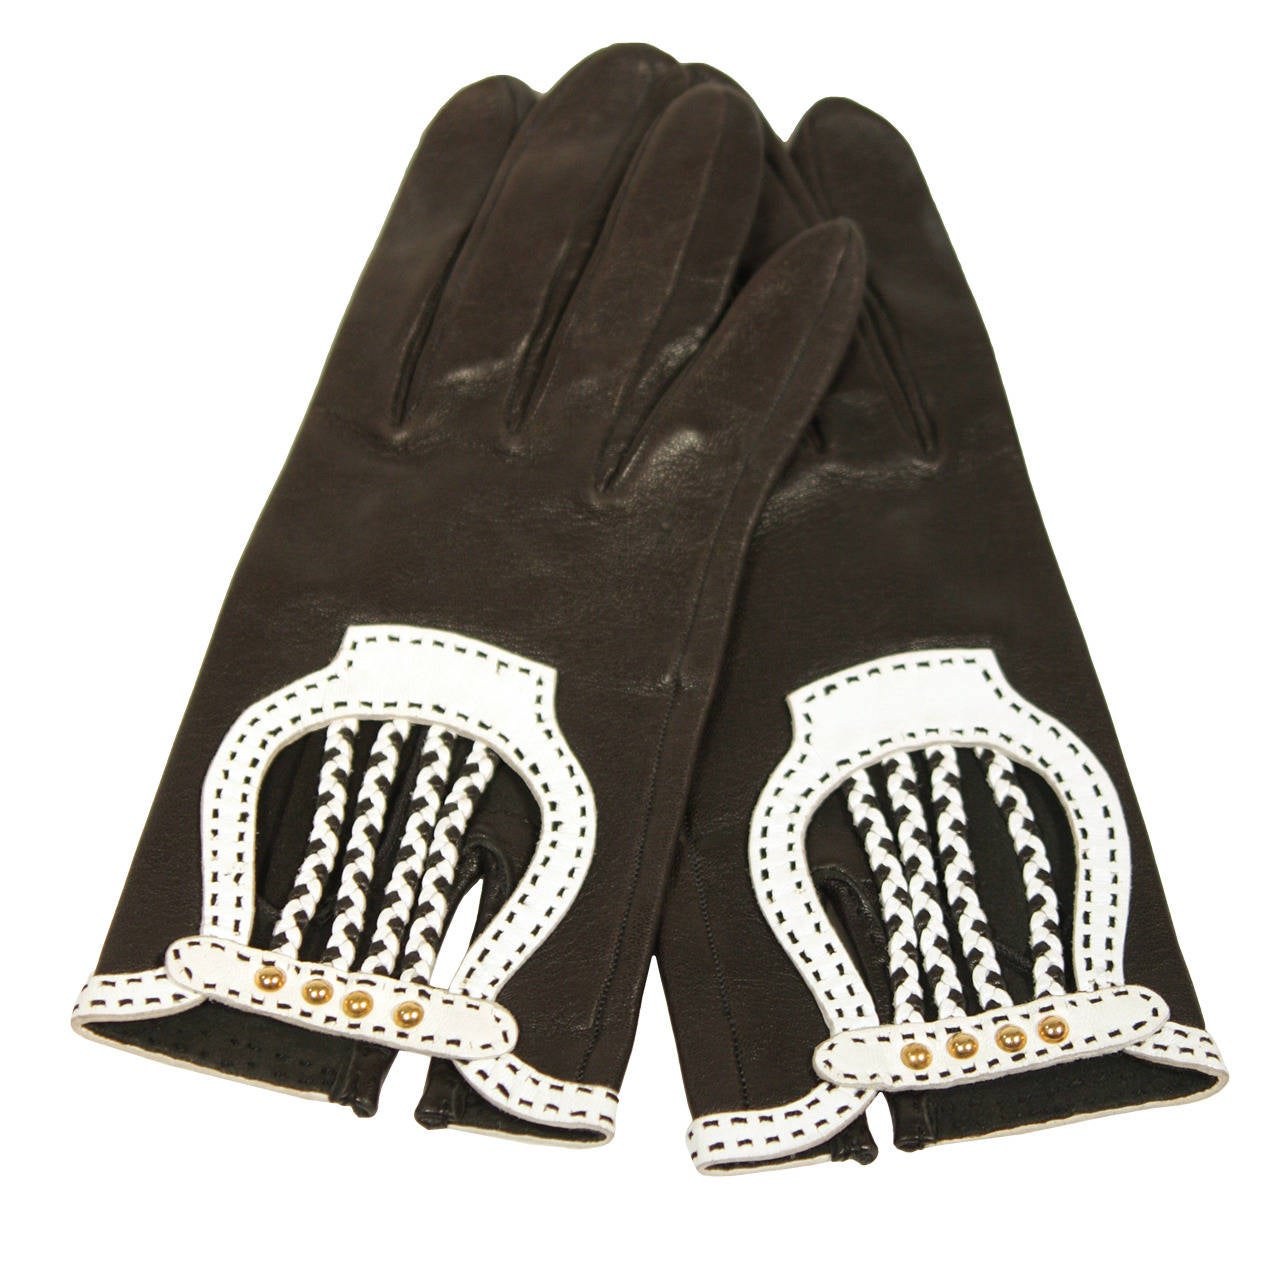 Hermes Black Leather Gloves with White Accents and Braiding Size 6.5